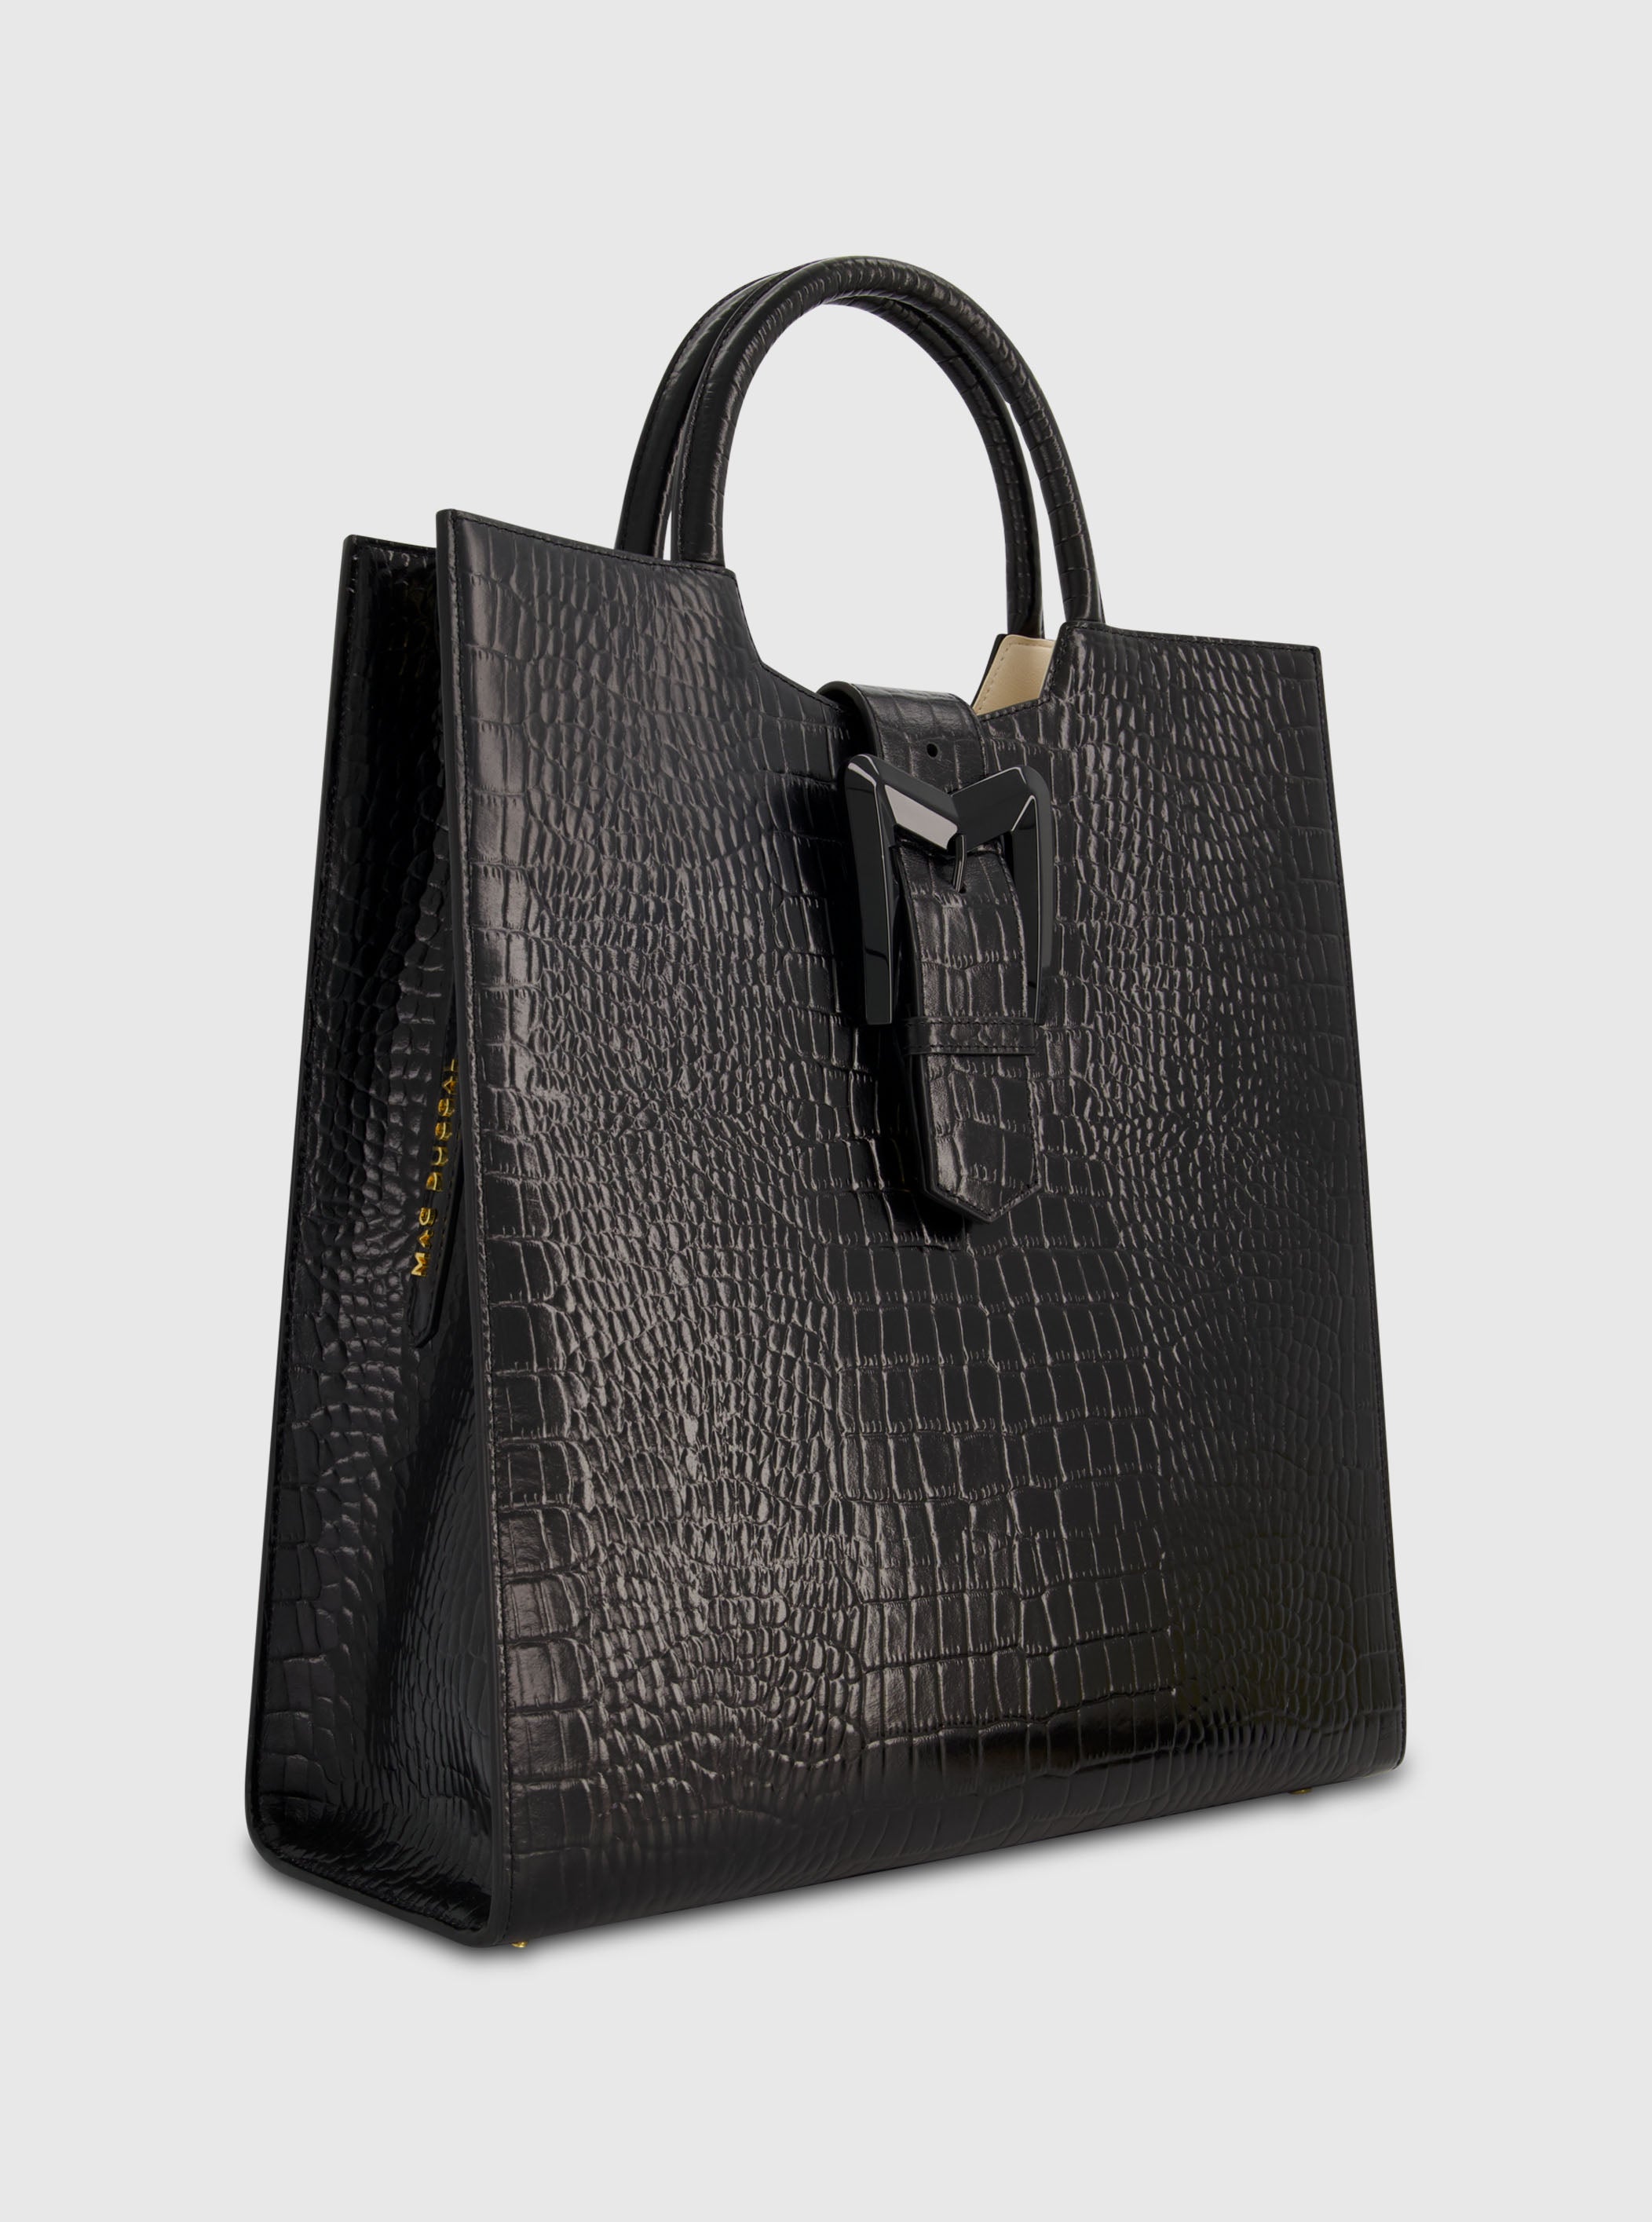 Buckled Maxi Croco Black Leather Tote Bag with Detachable Strap